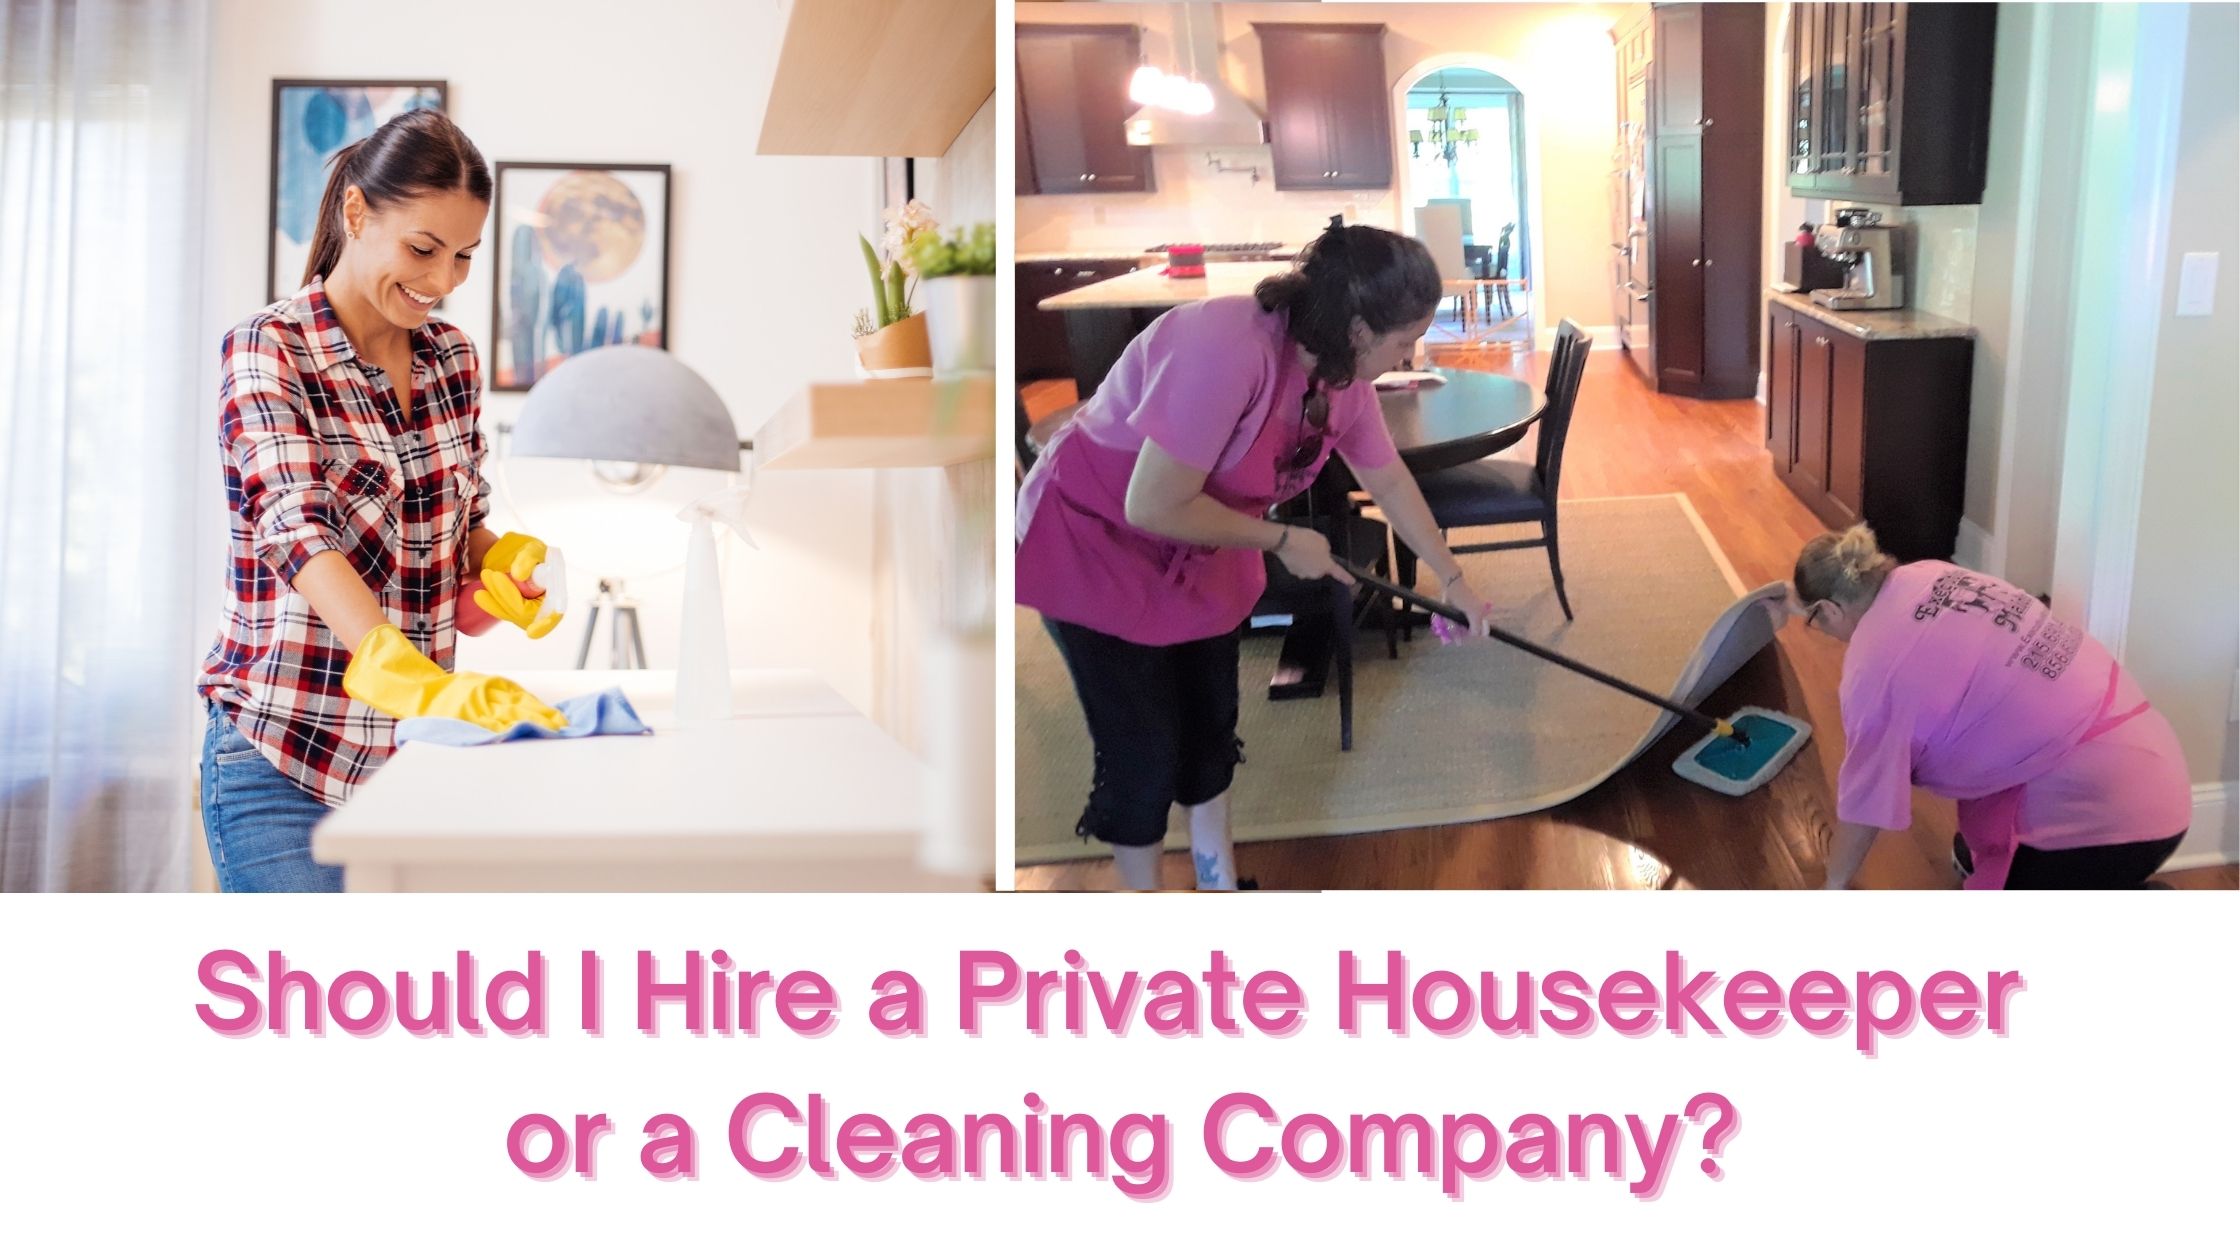 Private House Cleaner or Professional Cleaning Company